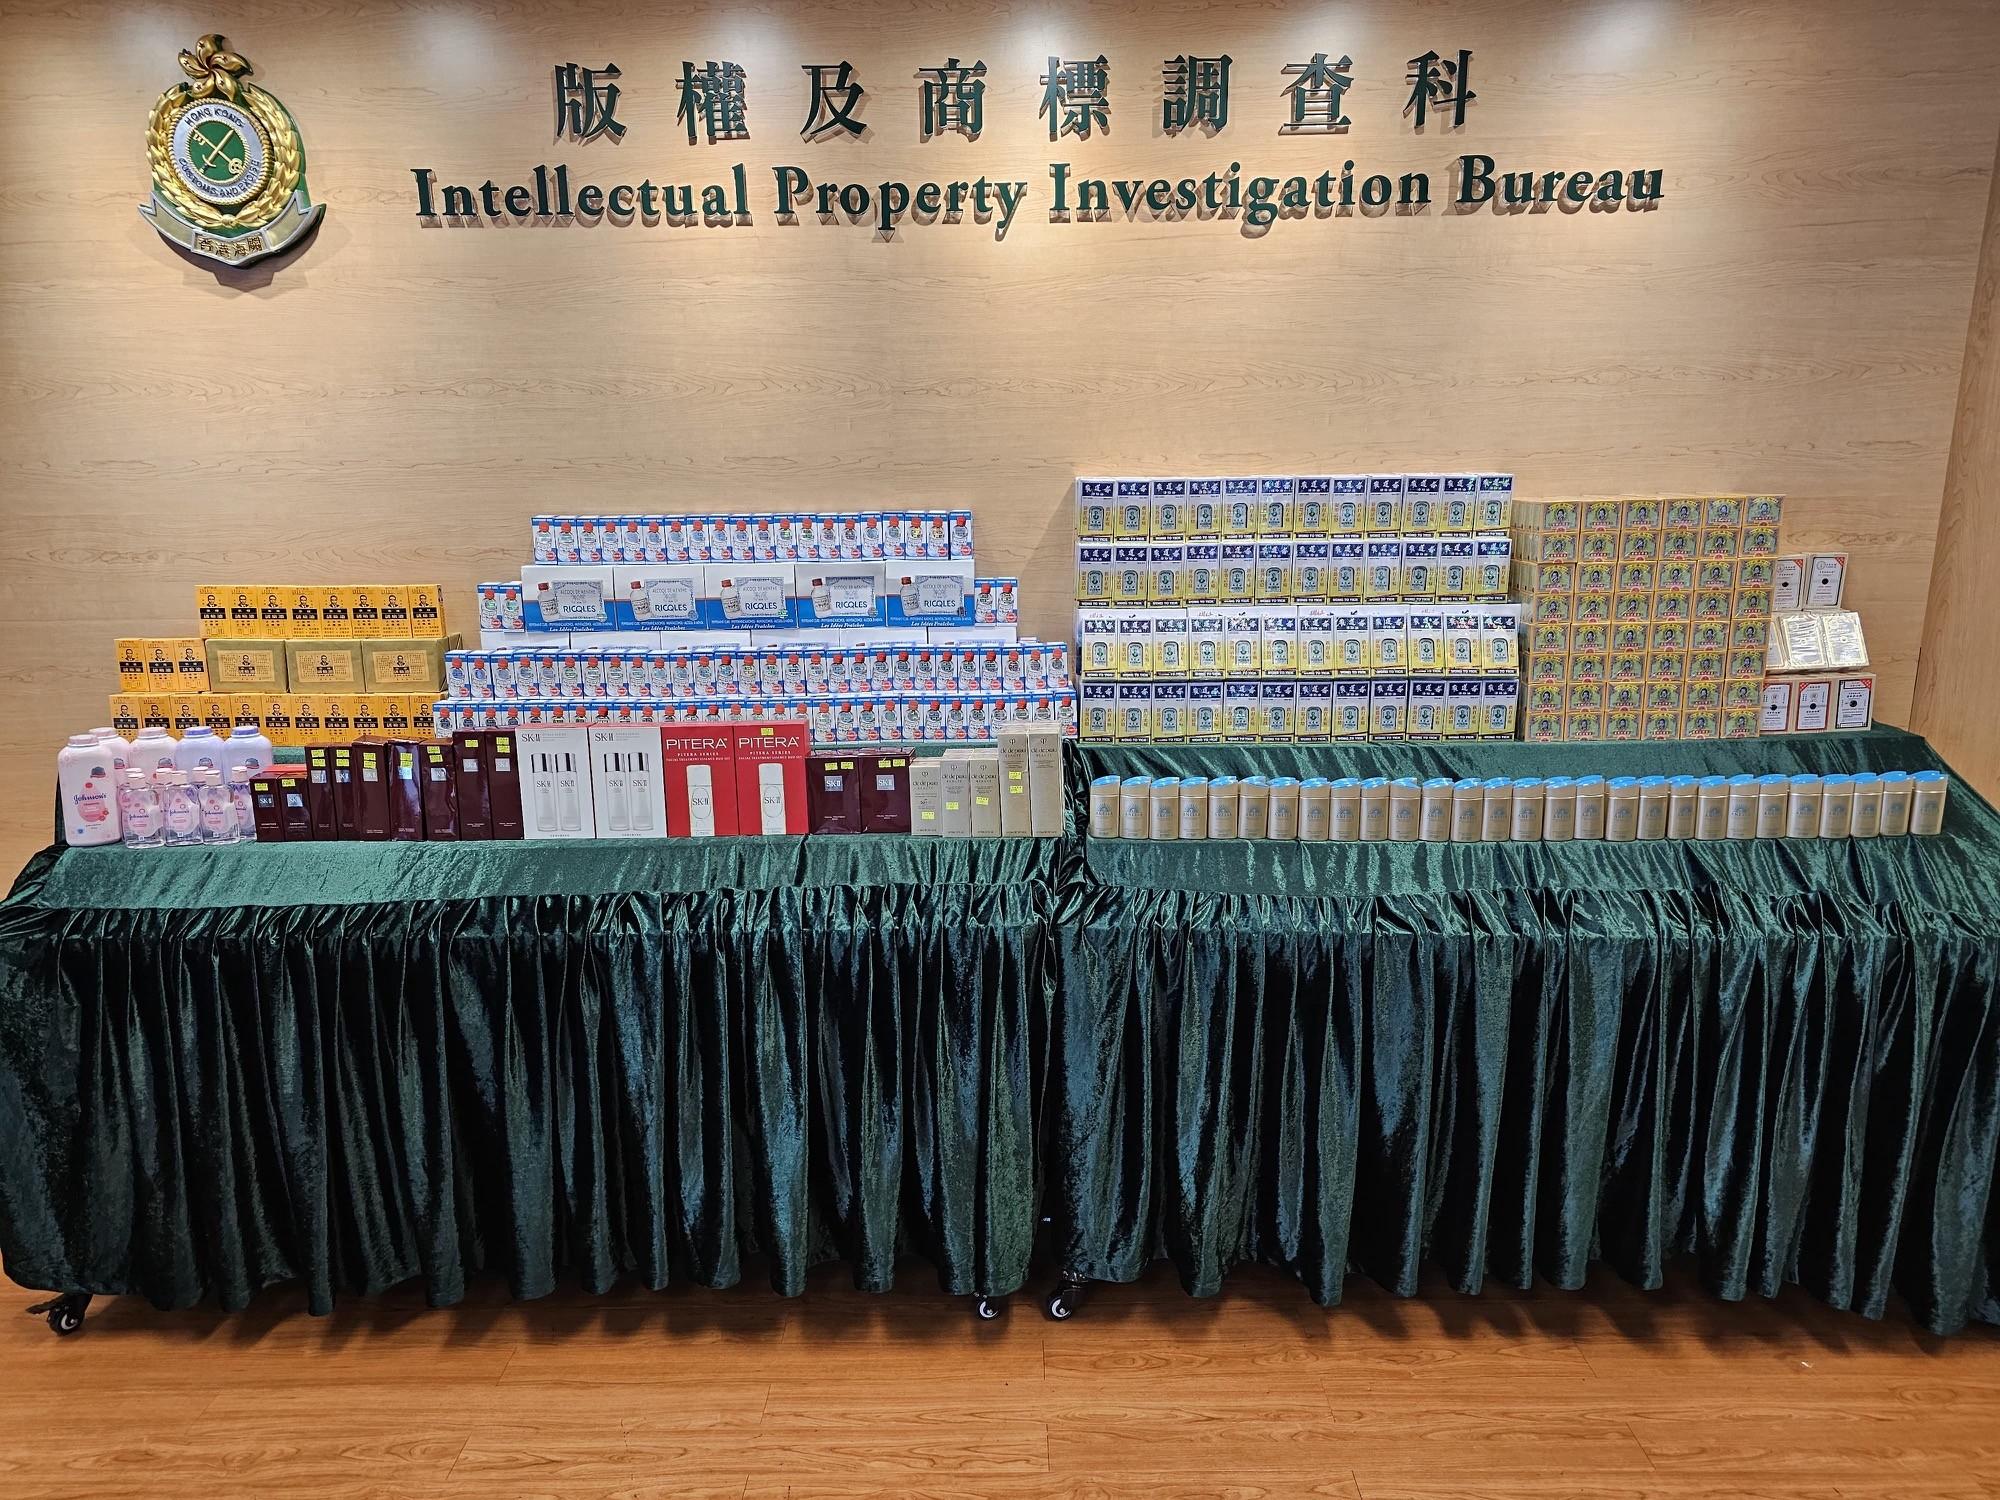 Hong Kong Customs conducted a special operation in Mong Kok and Fo Tan yesterday (June 4) to combat the sale of counterfeit goods and seized about 5 000 items of suspected counterfeit goods, including medicines and cosmetics, with an estimated market value of about $620,000. Photo shows some of the suspected counterfeit goods seized.